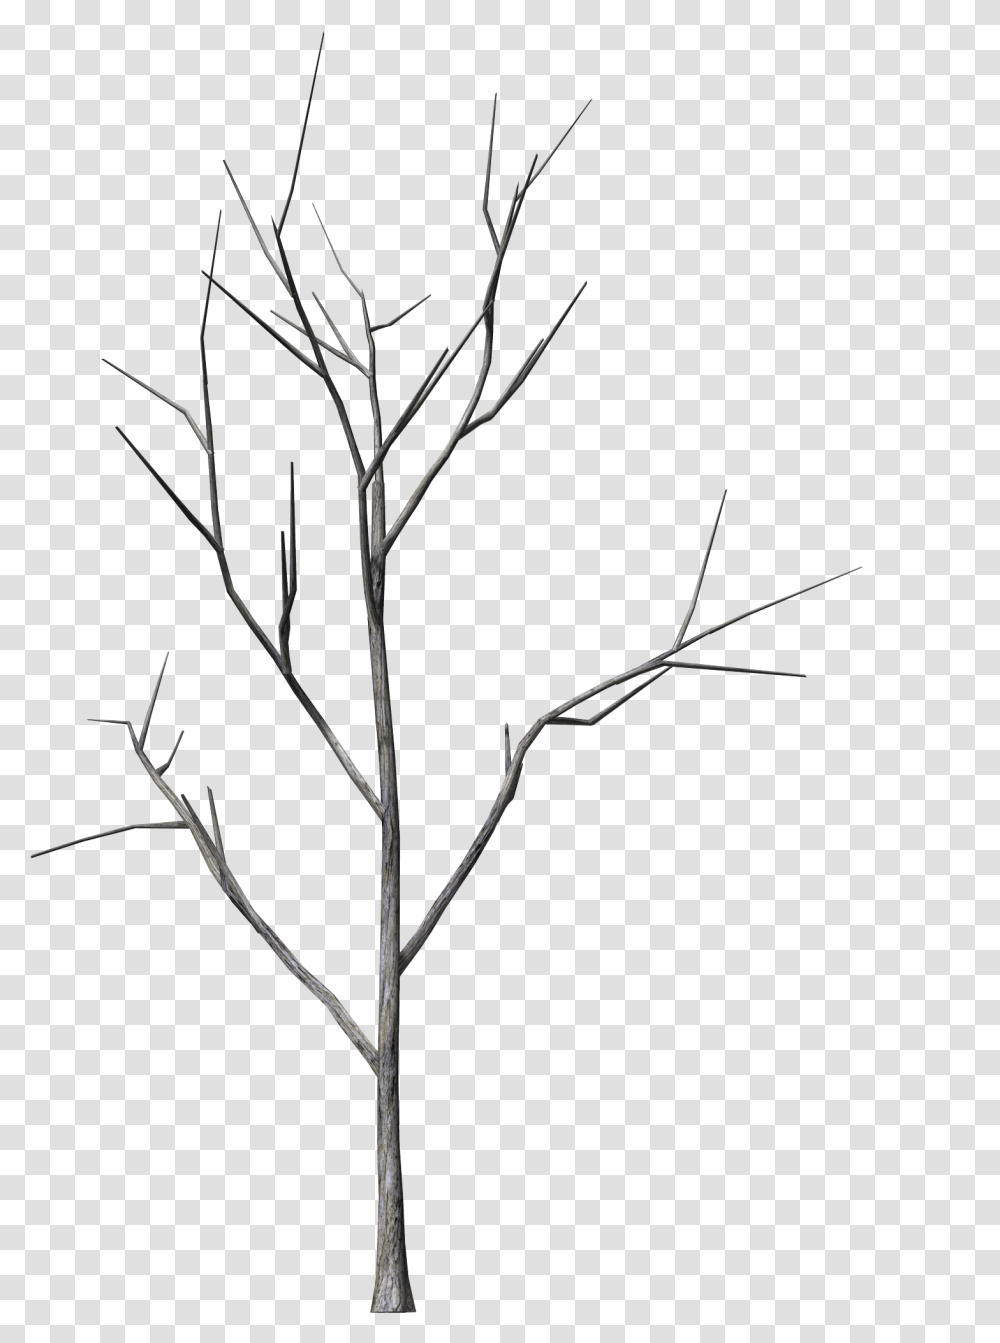 Branch Tree Hq Photo Line Art, Plant, Silhouette, Nature, Outdoors Transparent Png